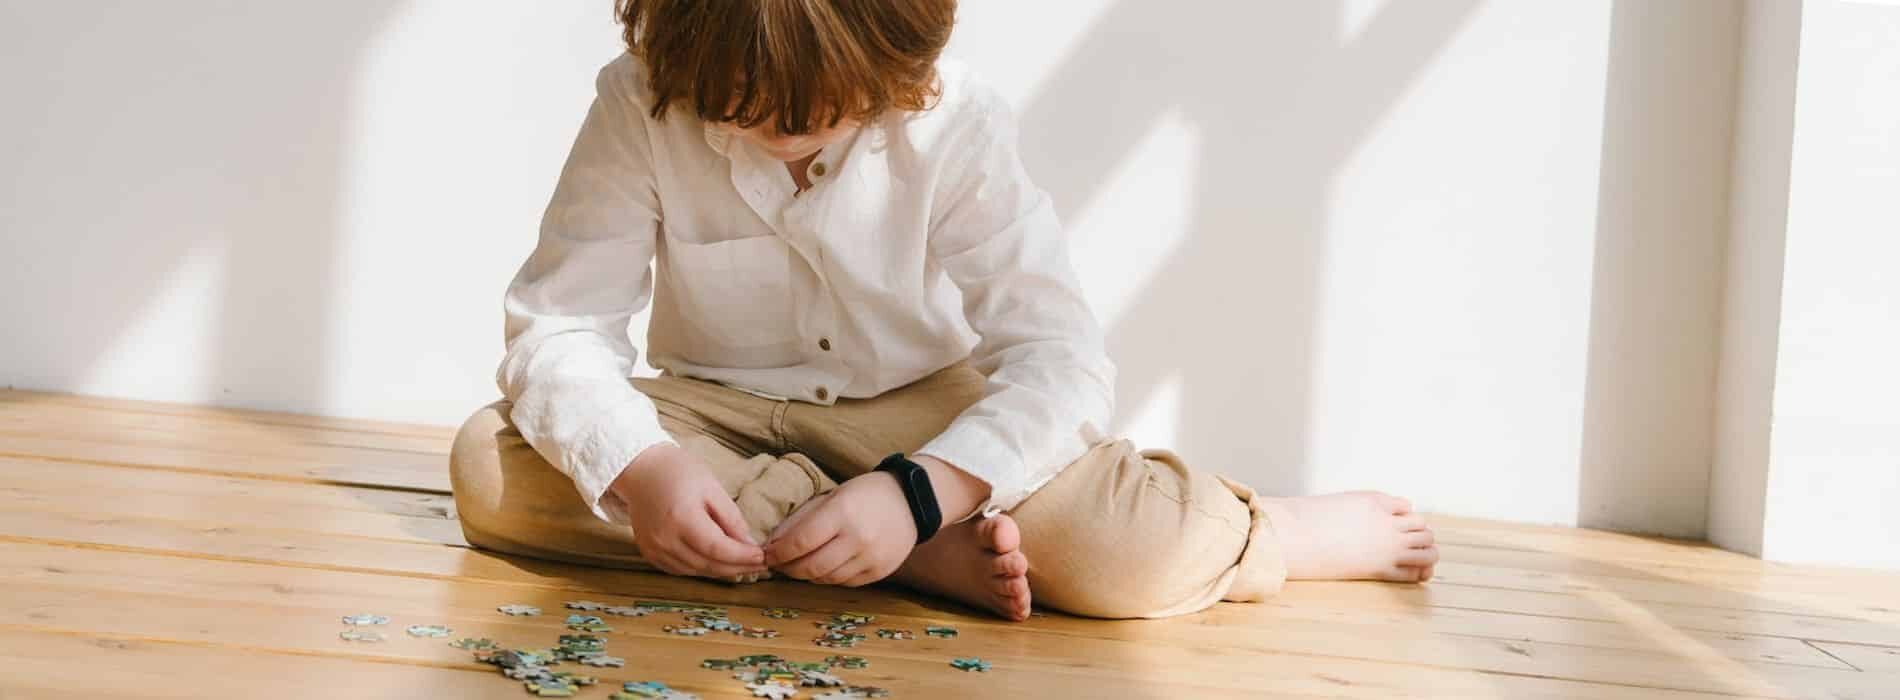 In the charming Wimbledon neighbourhood, SW19, a delightful child joyfully engages in assembling a puzzle on a beautifully refinished oak strip floor. The freshly rejuvenated surface provides the perfect setting for playtime and family moments in this inviting space.